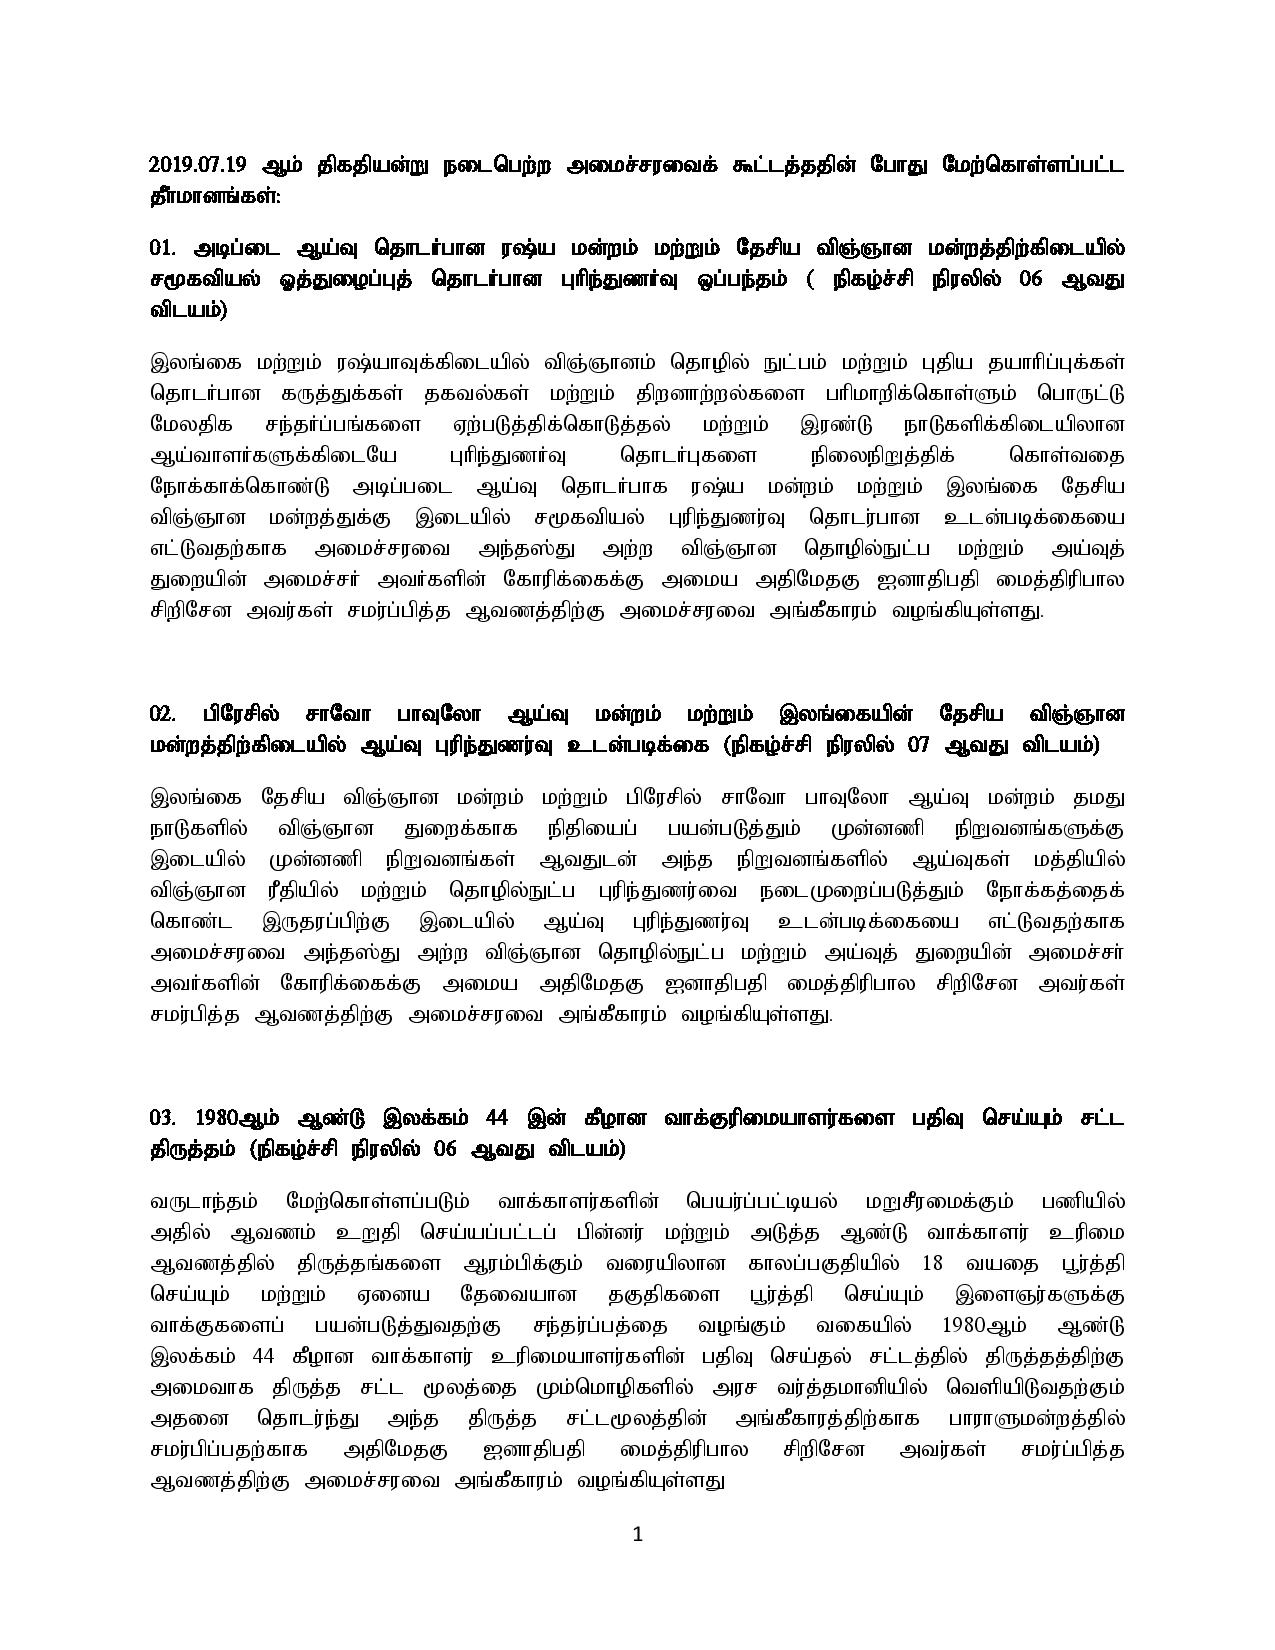 cabinet decision Tamil 19.07.2019 page 001